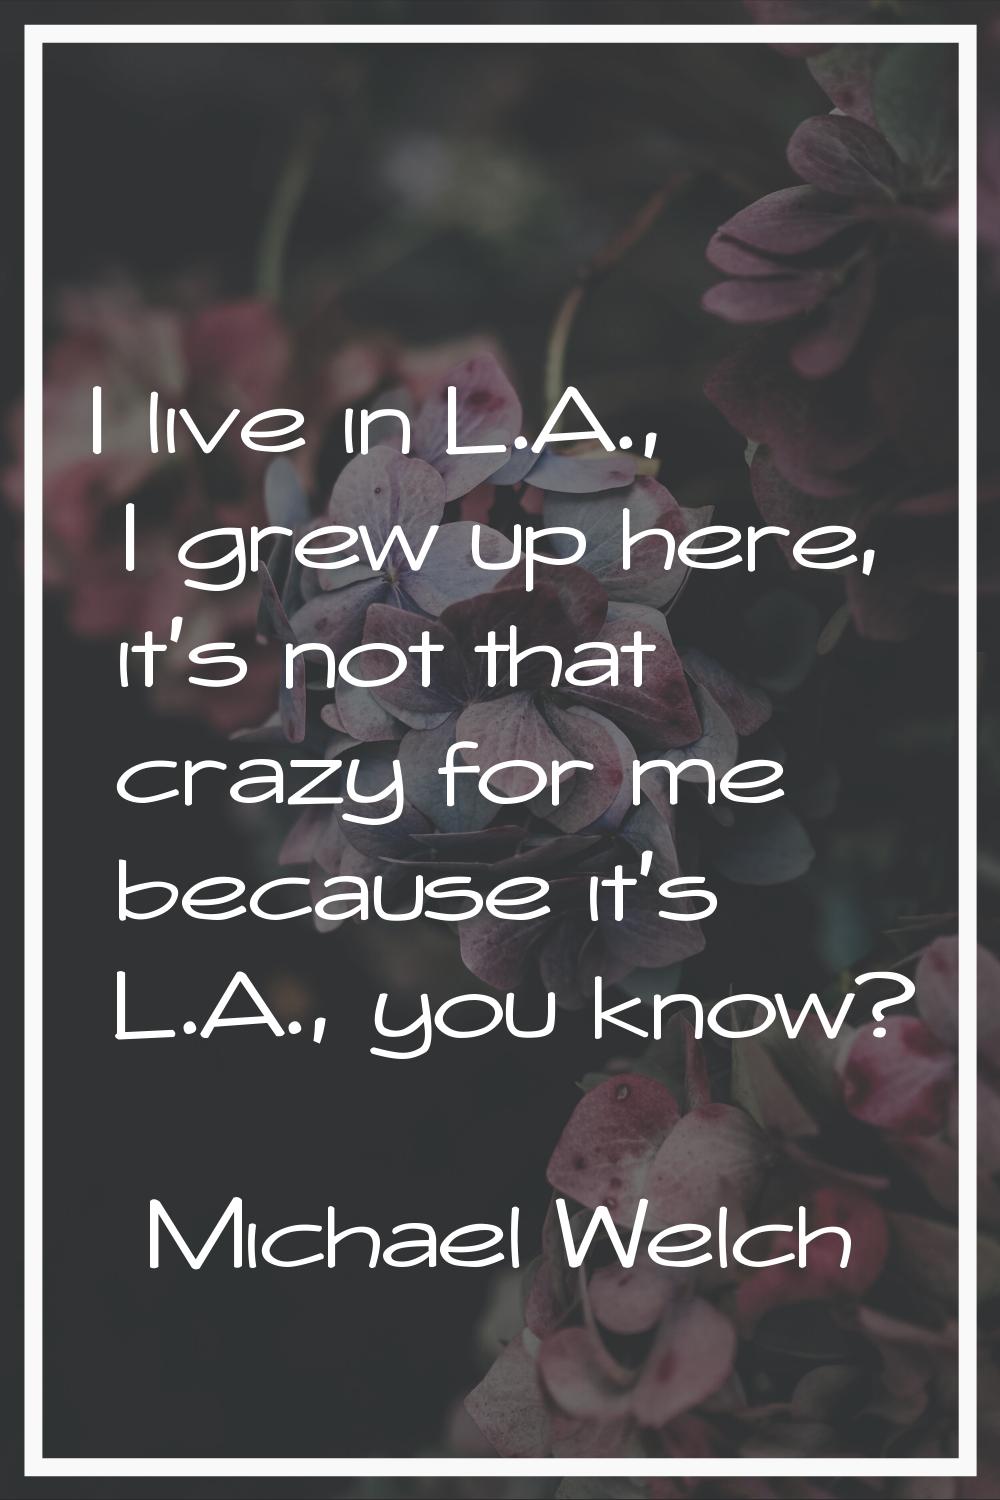 I live in L.A., I grew up here, it's not that crazy for me because it's L.A., you know?